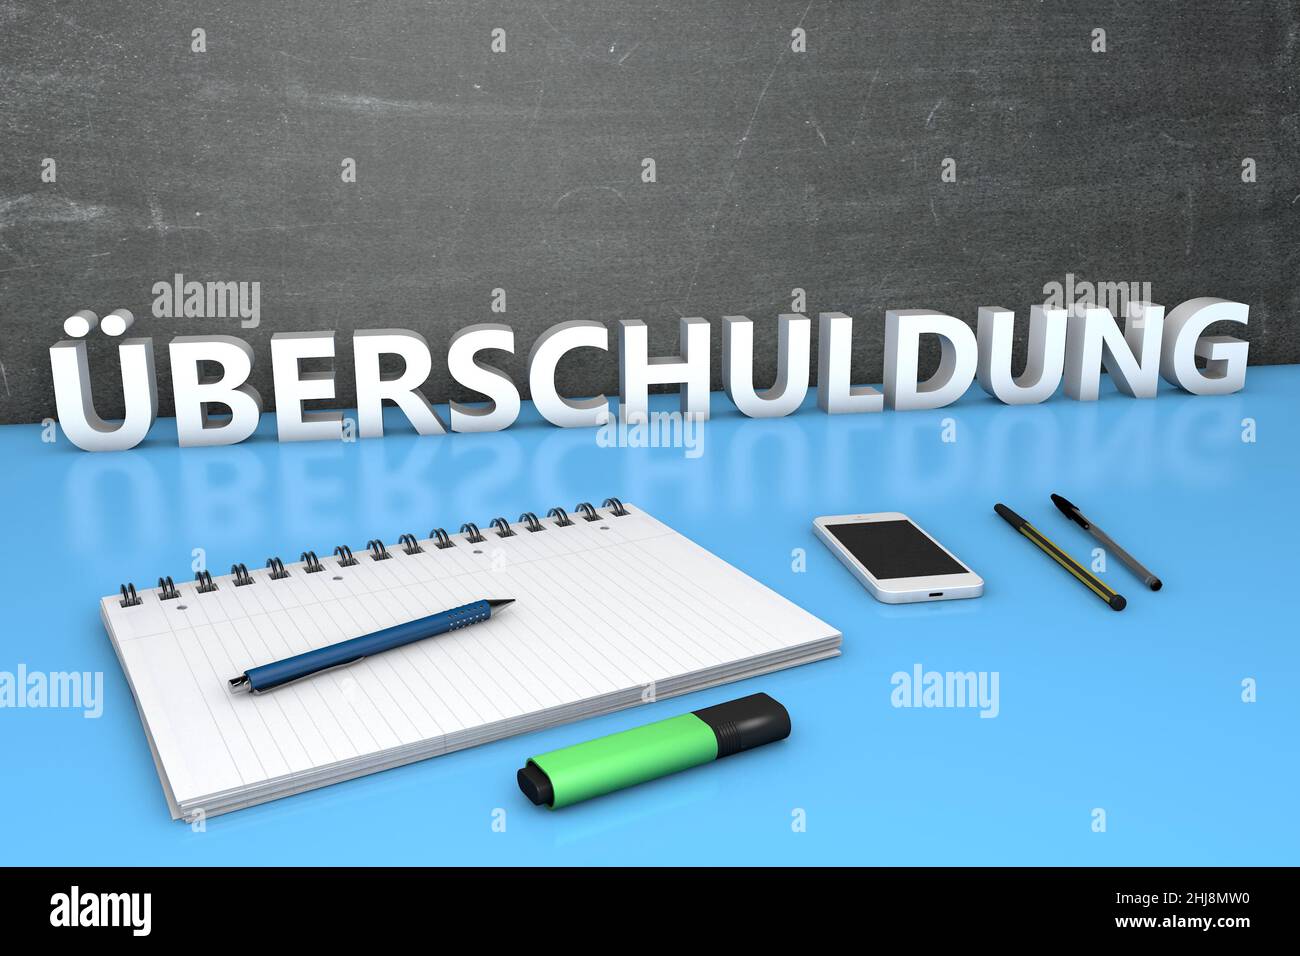 Ueberschuldung - german word for over indebtedness  - text concept with chalkboard, notebook, pens and mobile phone. 3D render illustration. Stock Photo